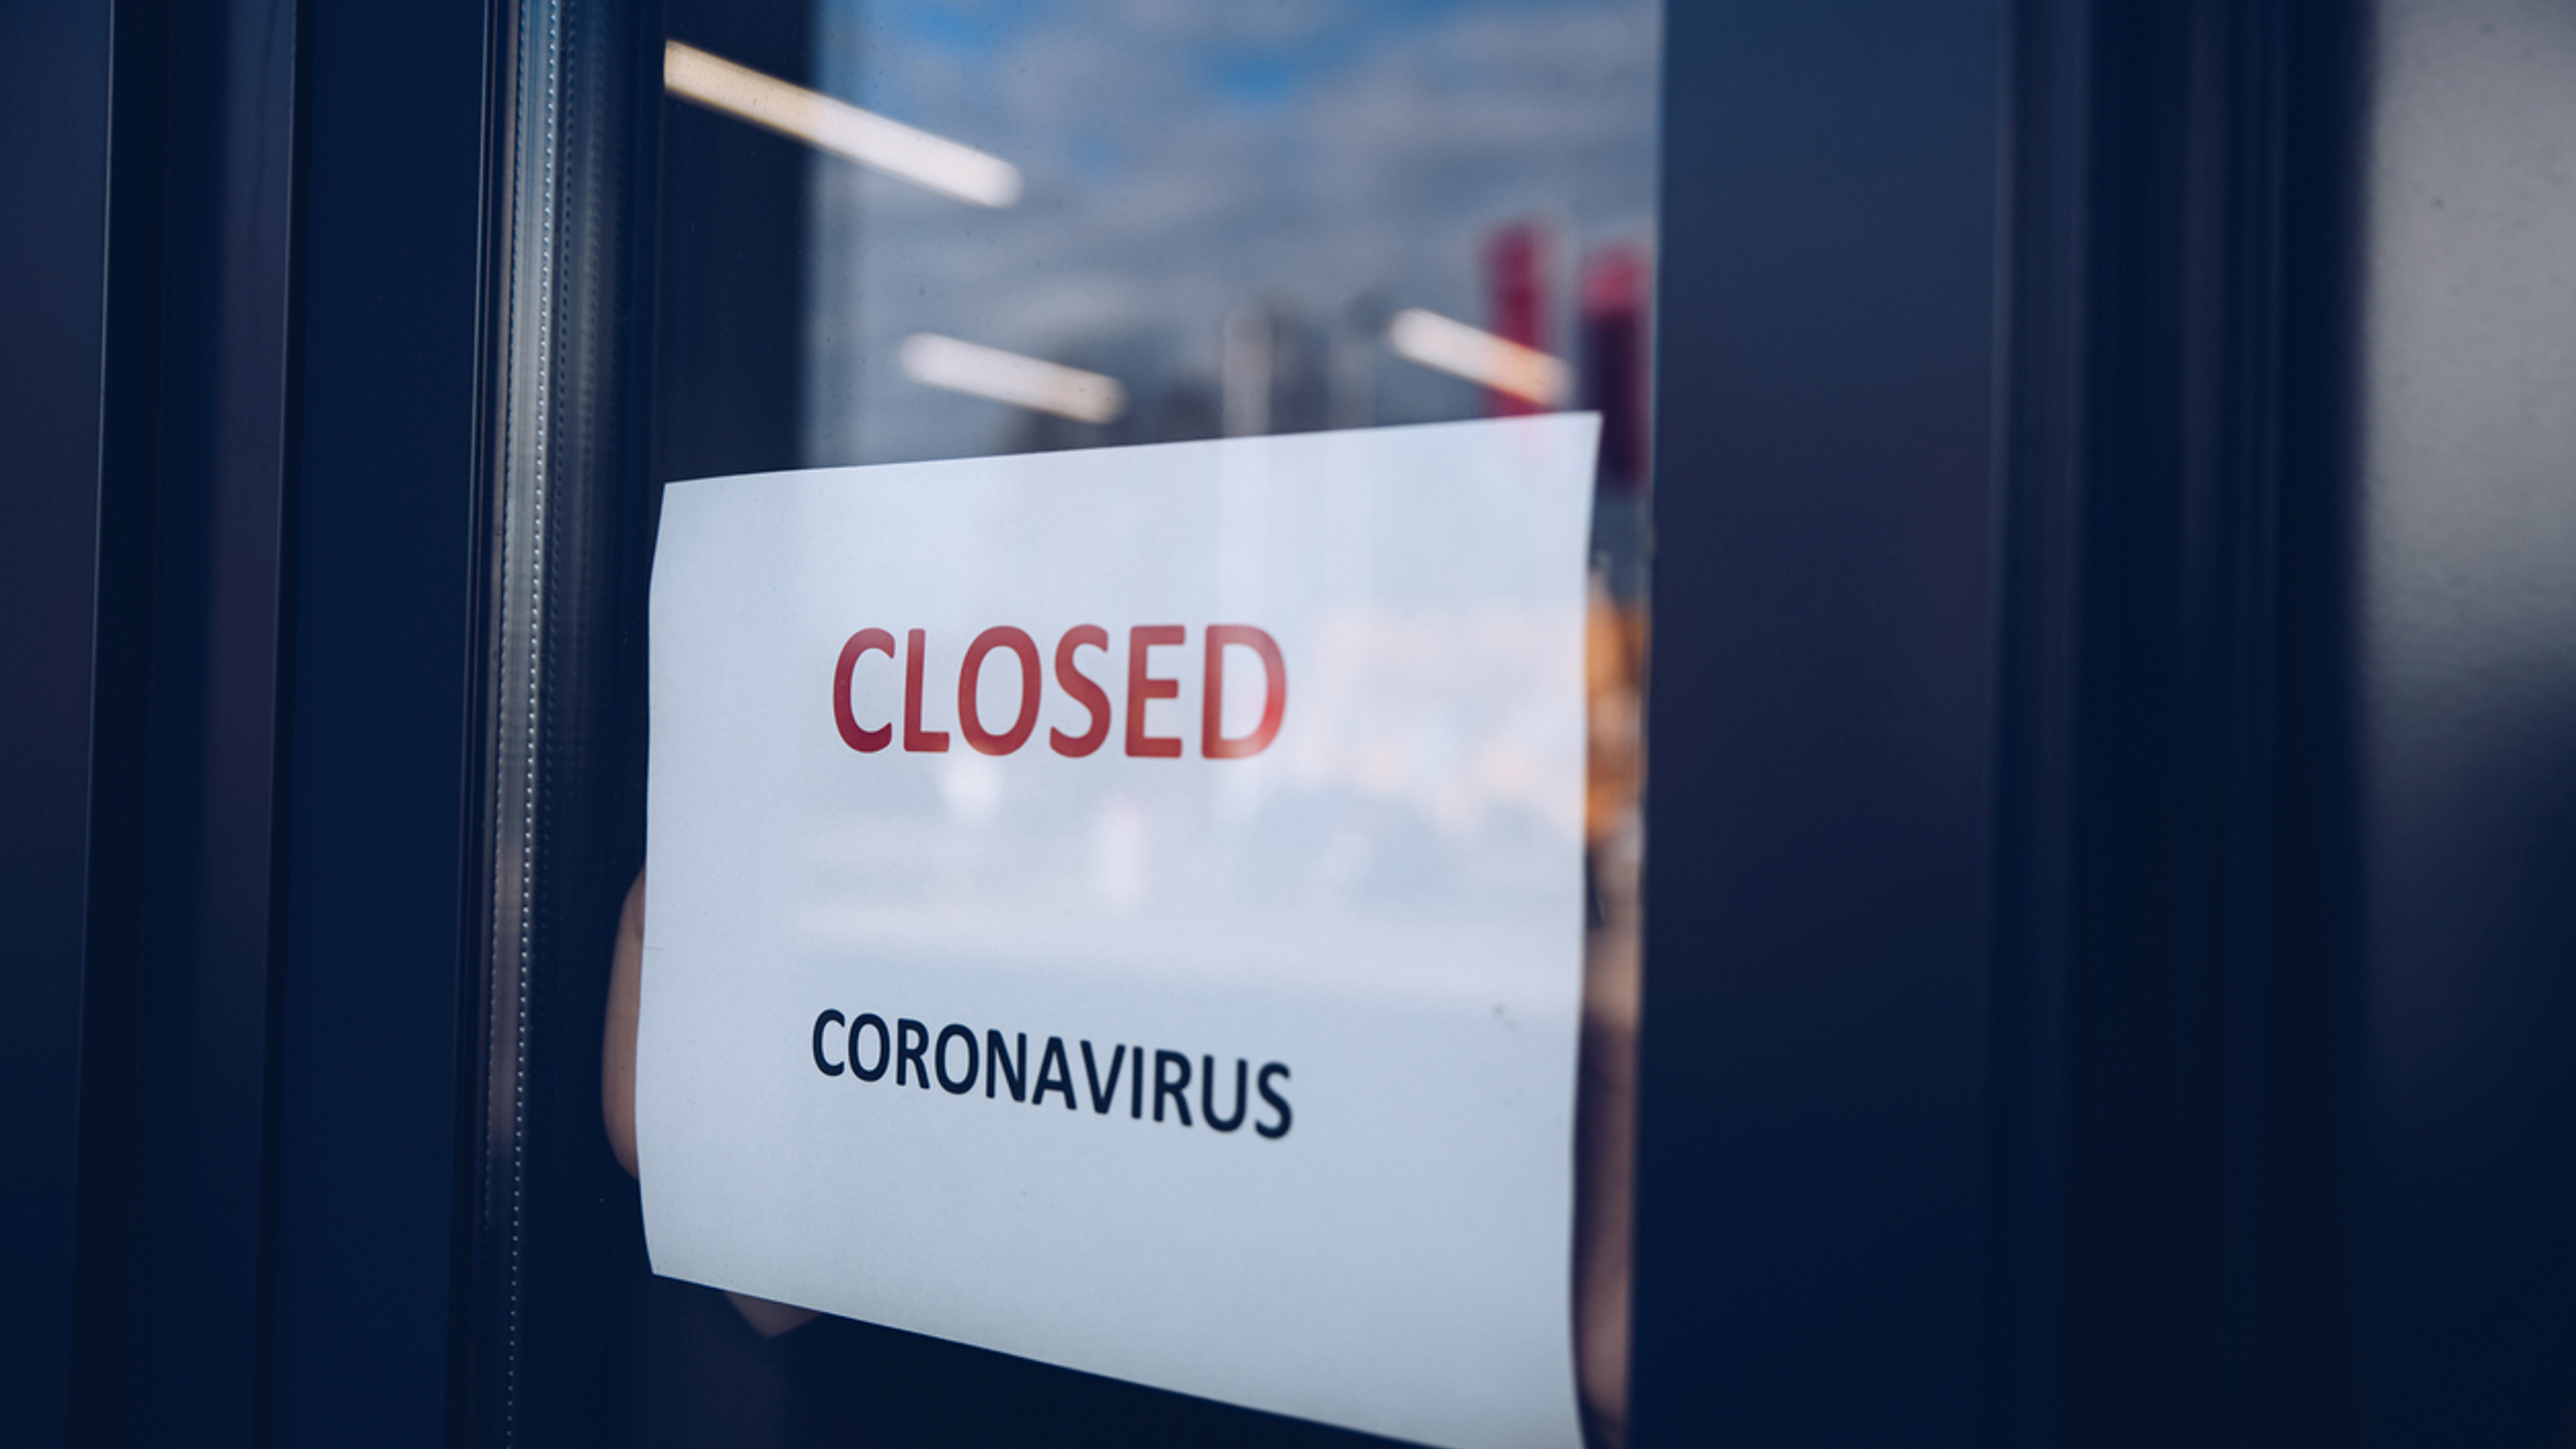 New guidance on closure of businesses